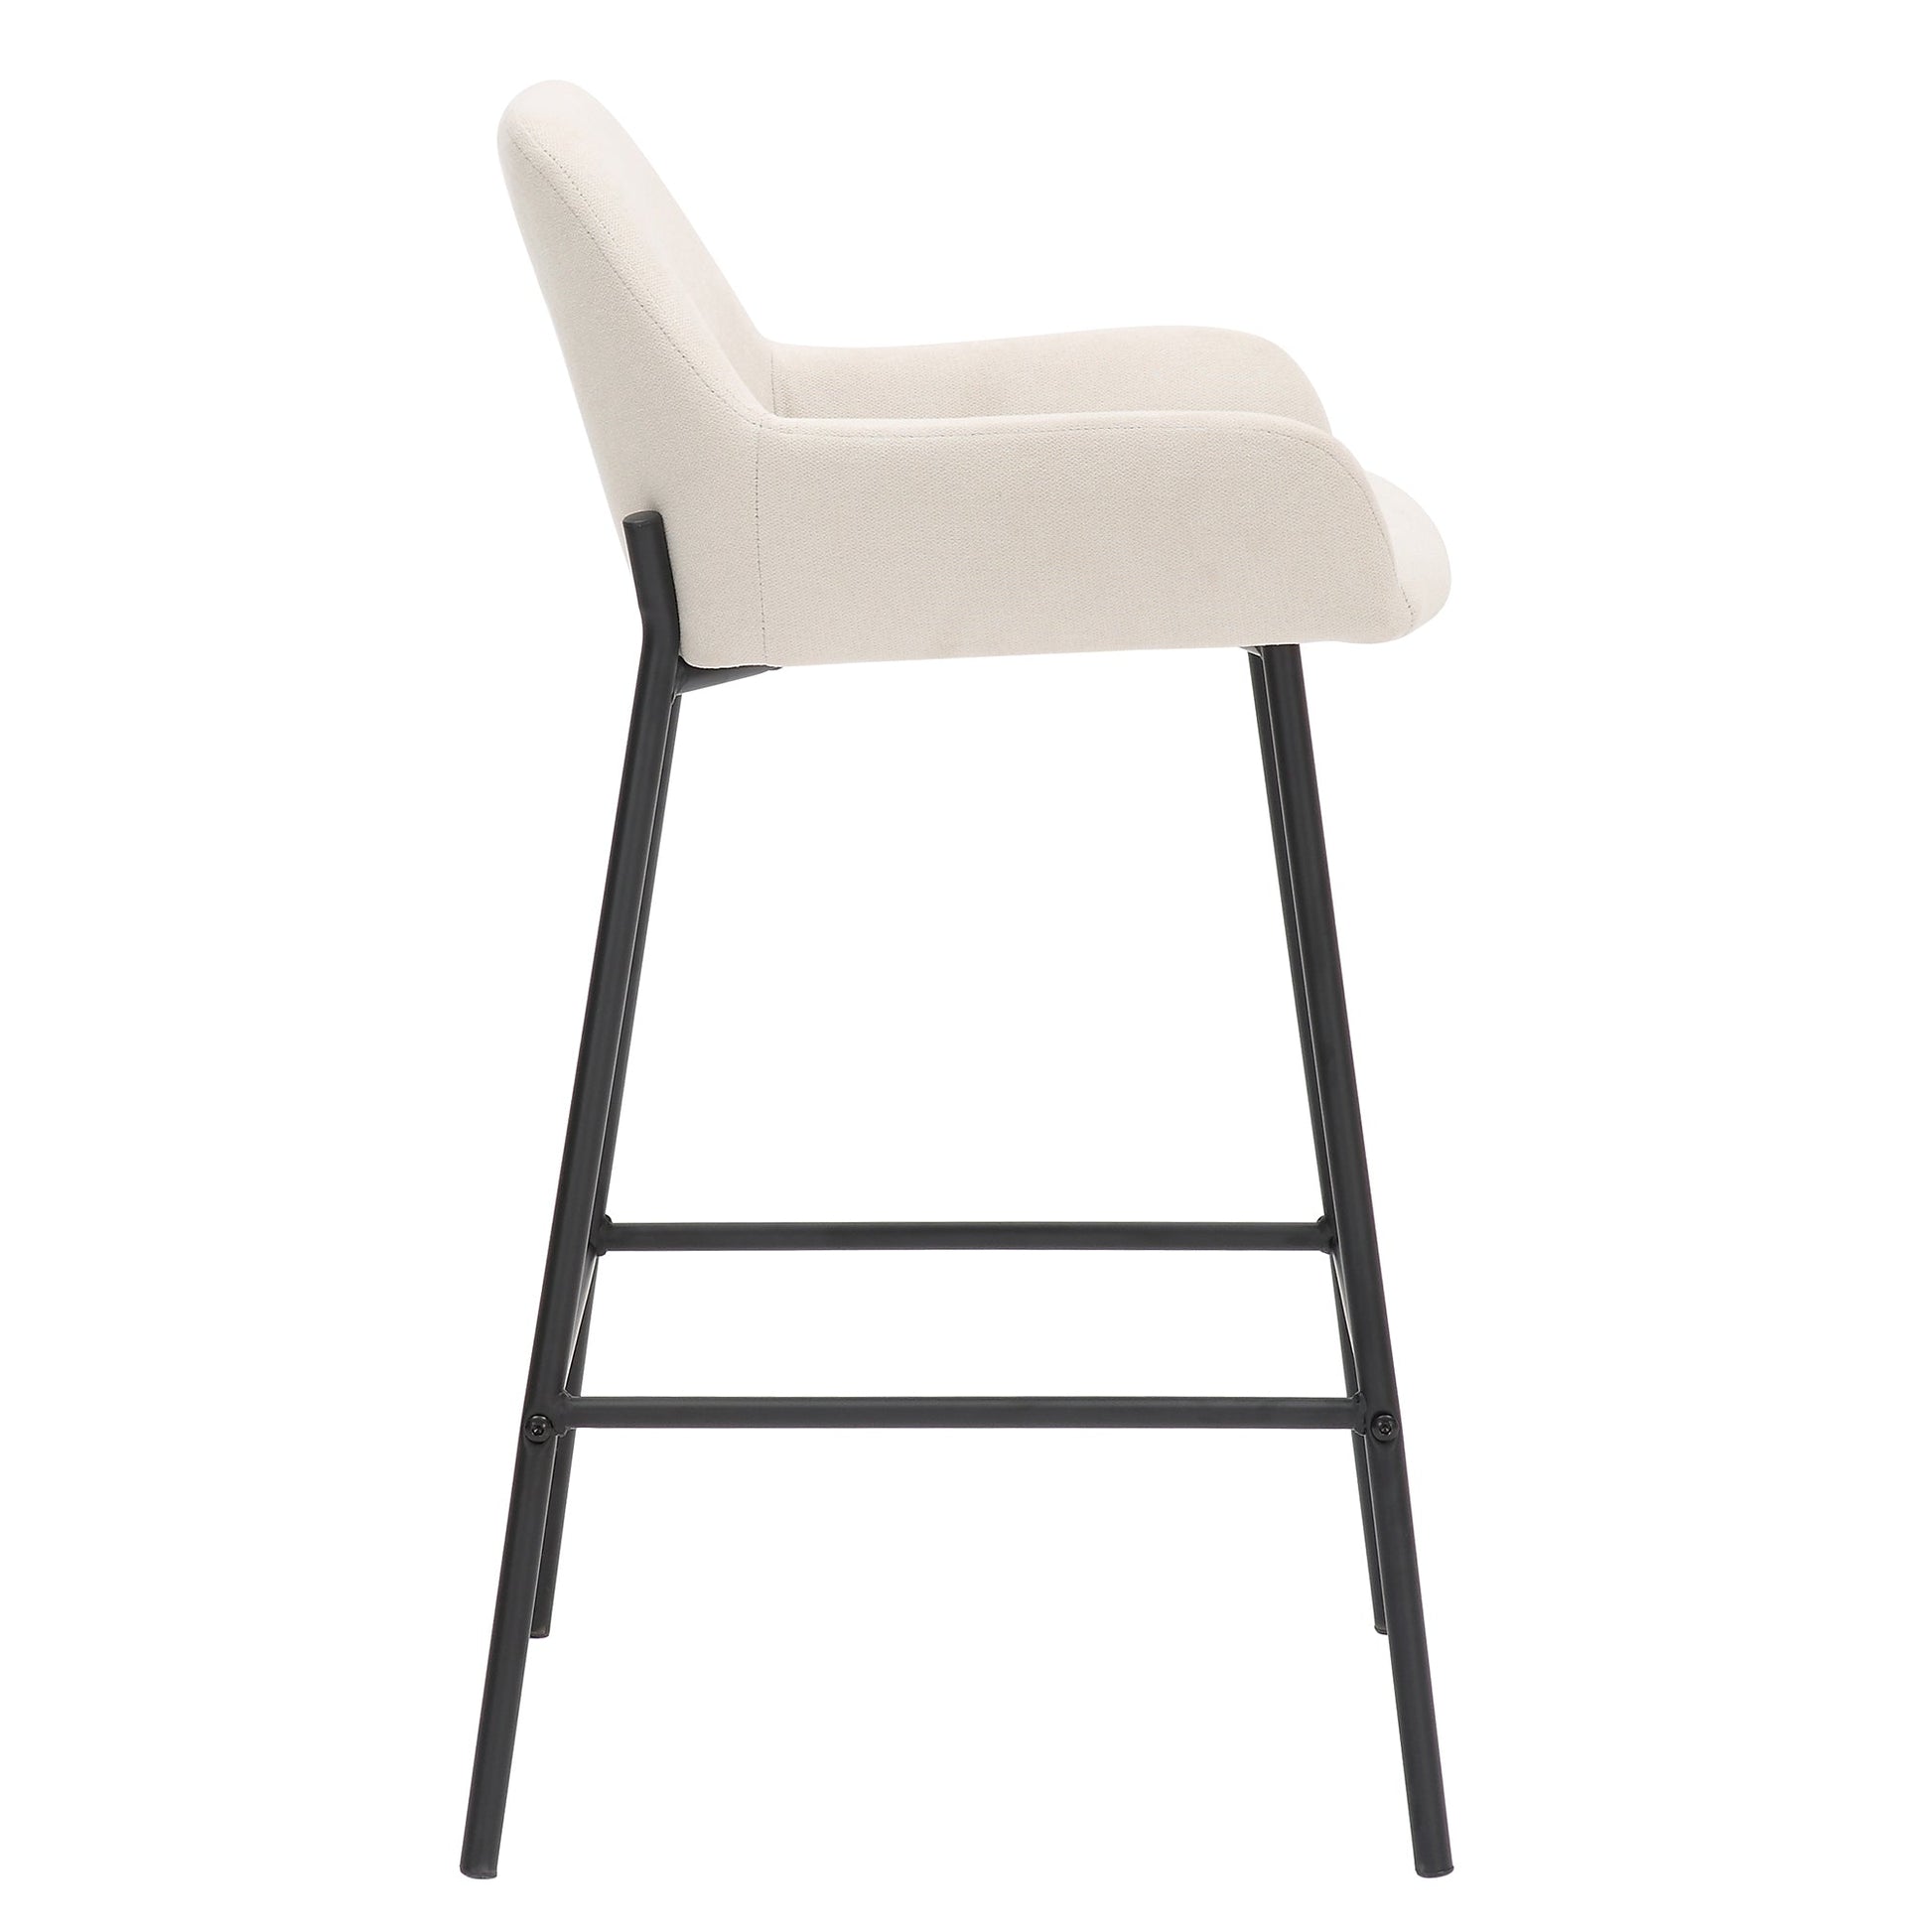 26" Counter Stool | Set of 2 | Baily Cream and Black - Your Bar Stools Canada